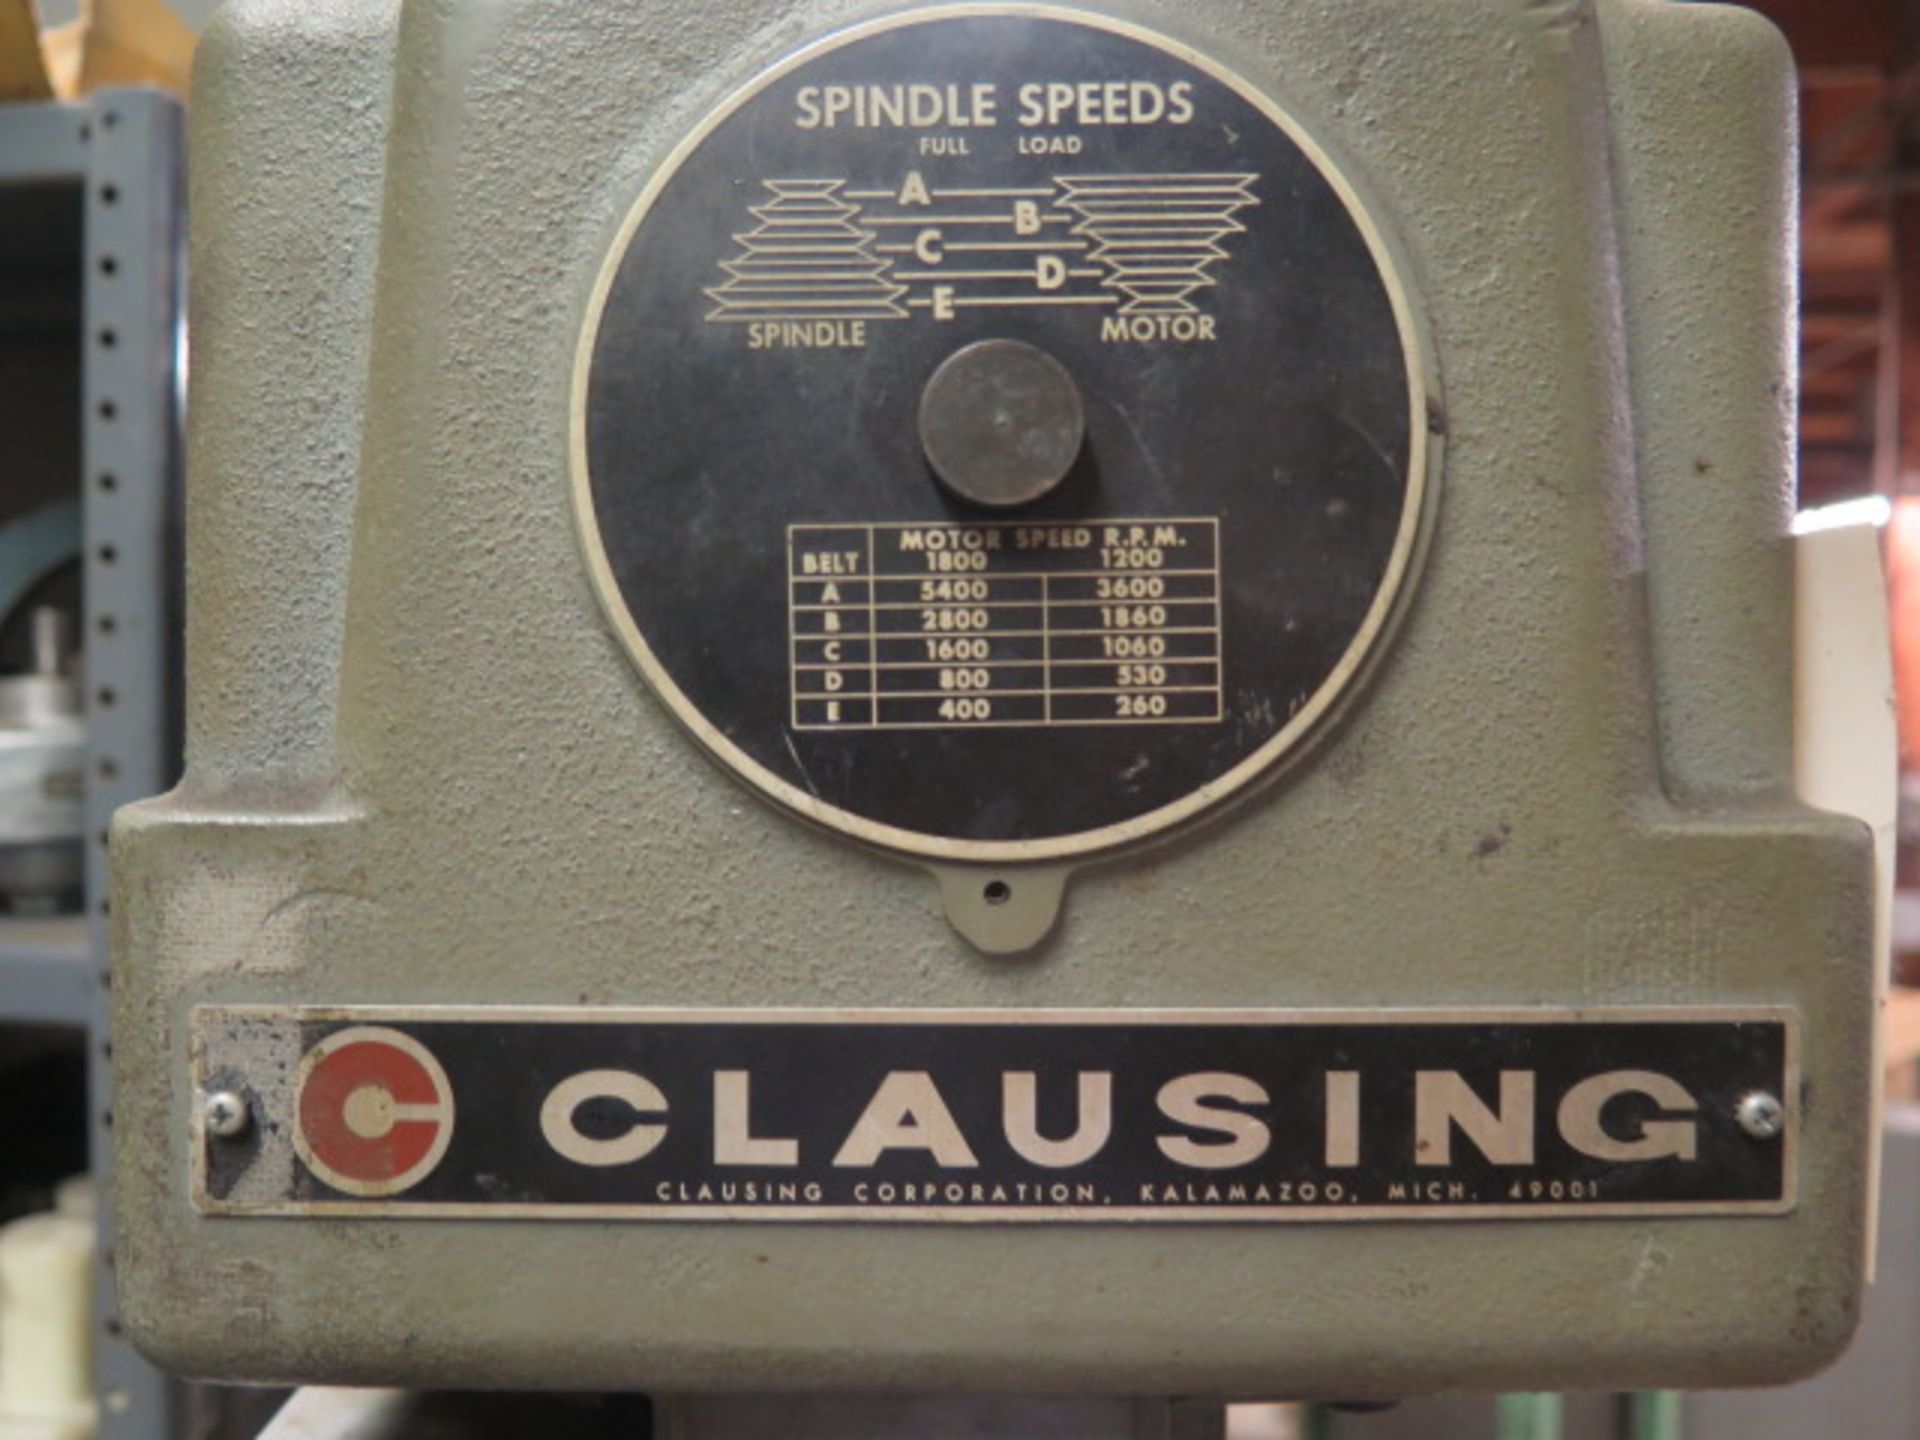 Clausing 1644 Pedestal Drill Press - Image 4 of 4